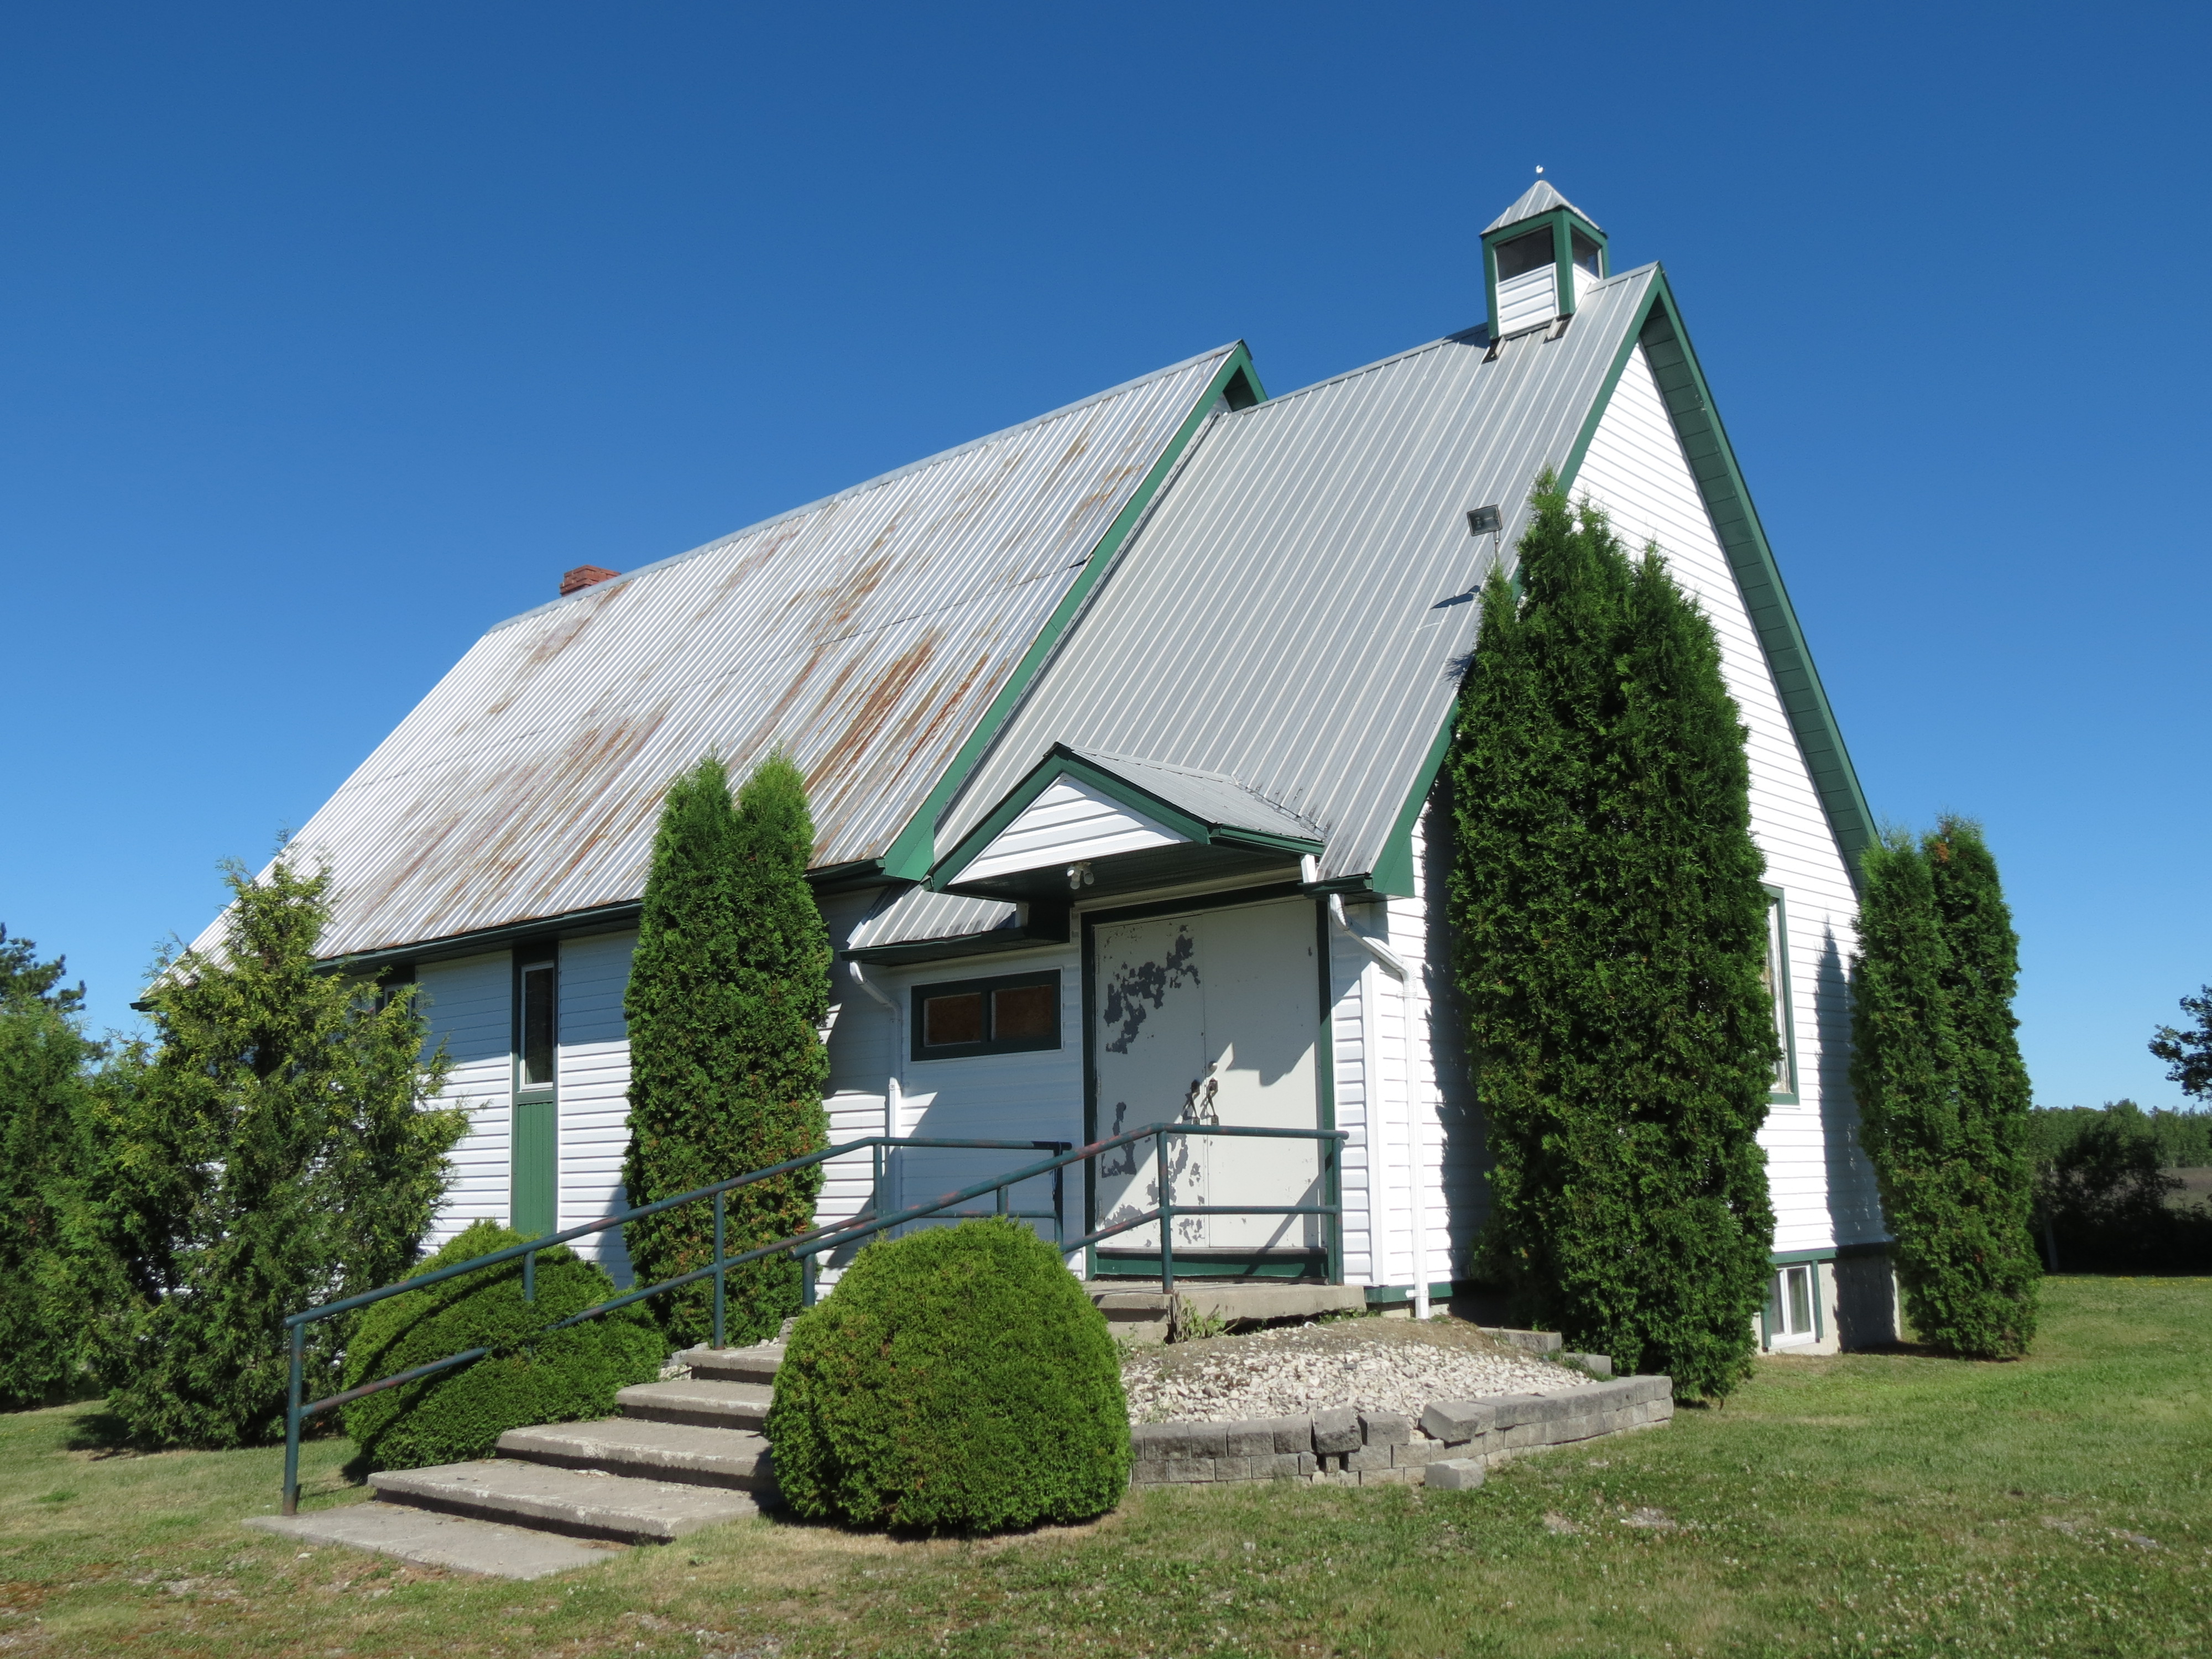 The Milberta Church; a large white and green wooden church from the early 1900s, slightly weathered and surrounded by tall green manicured shrubs and green grass 